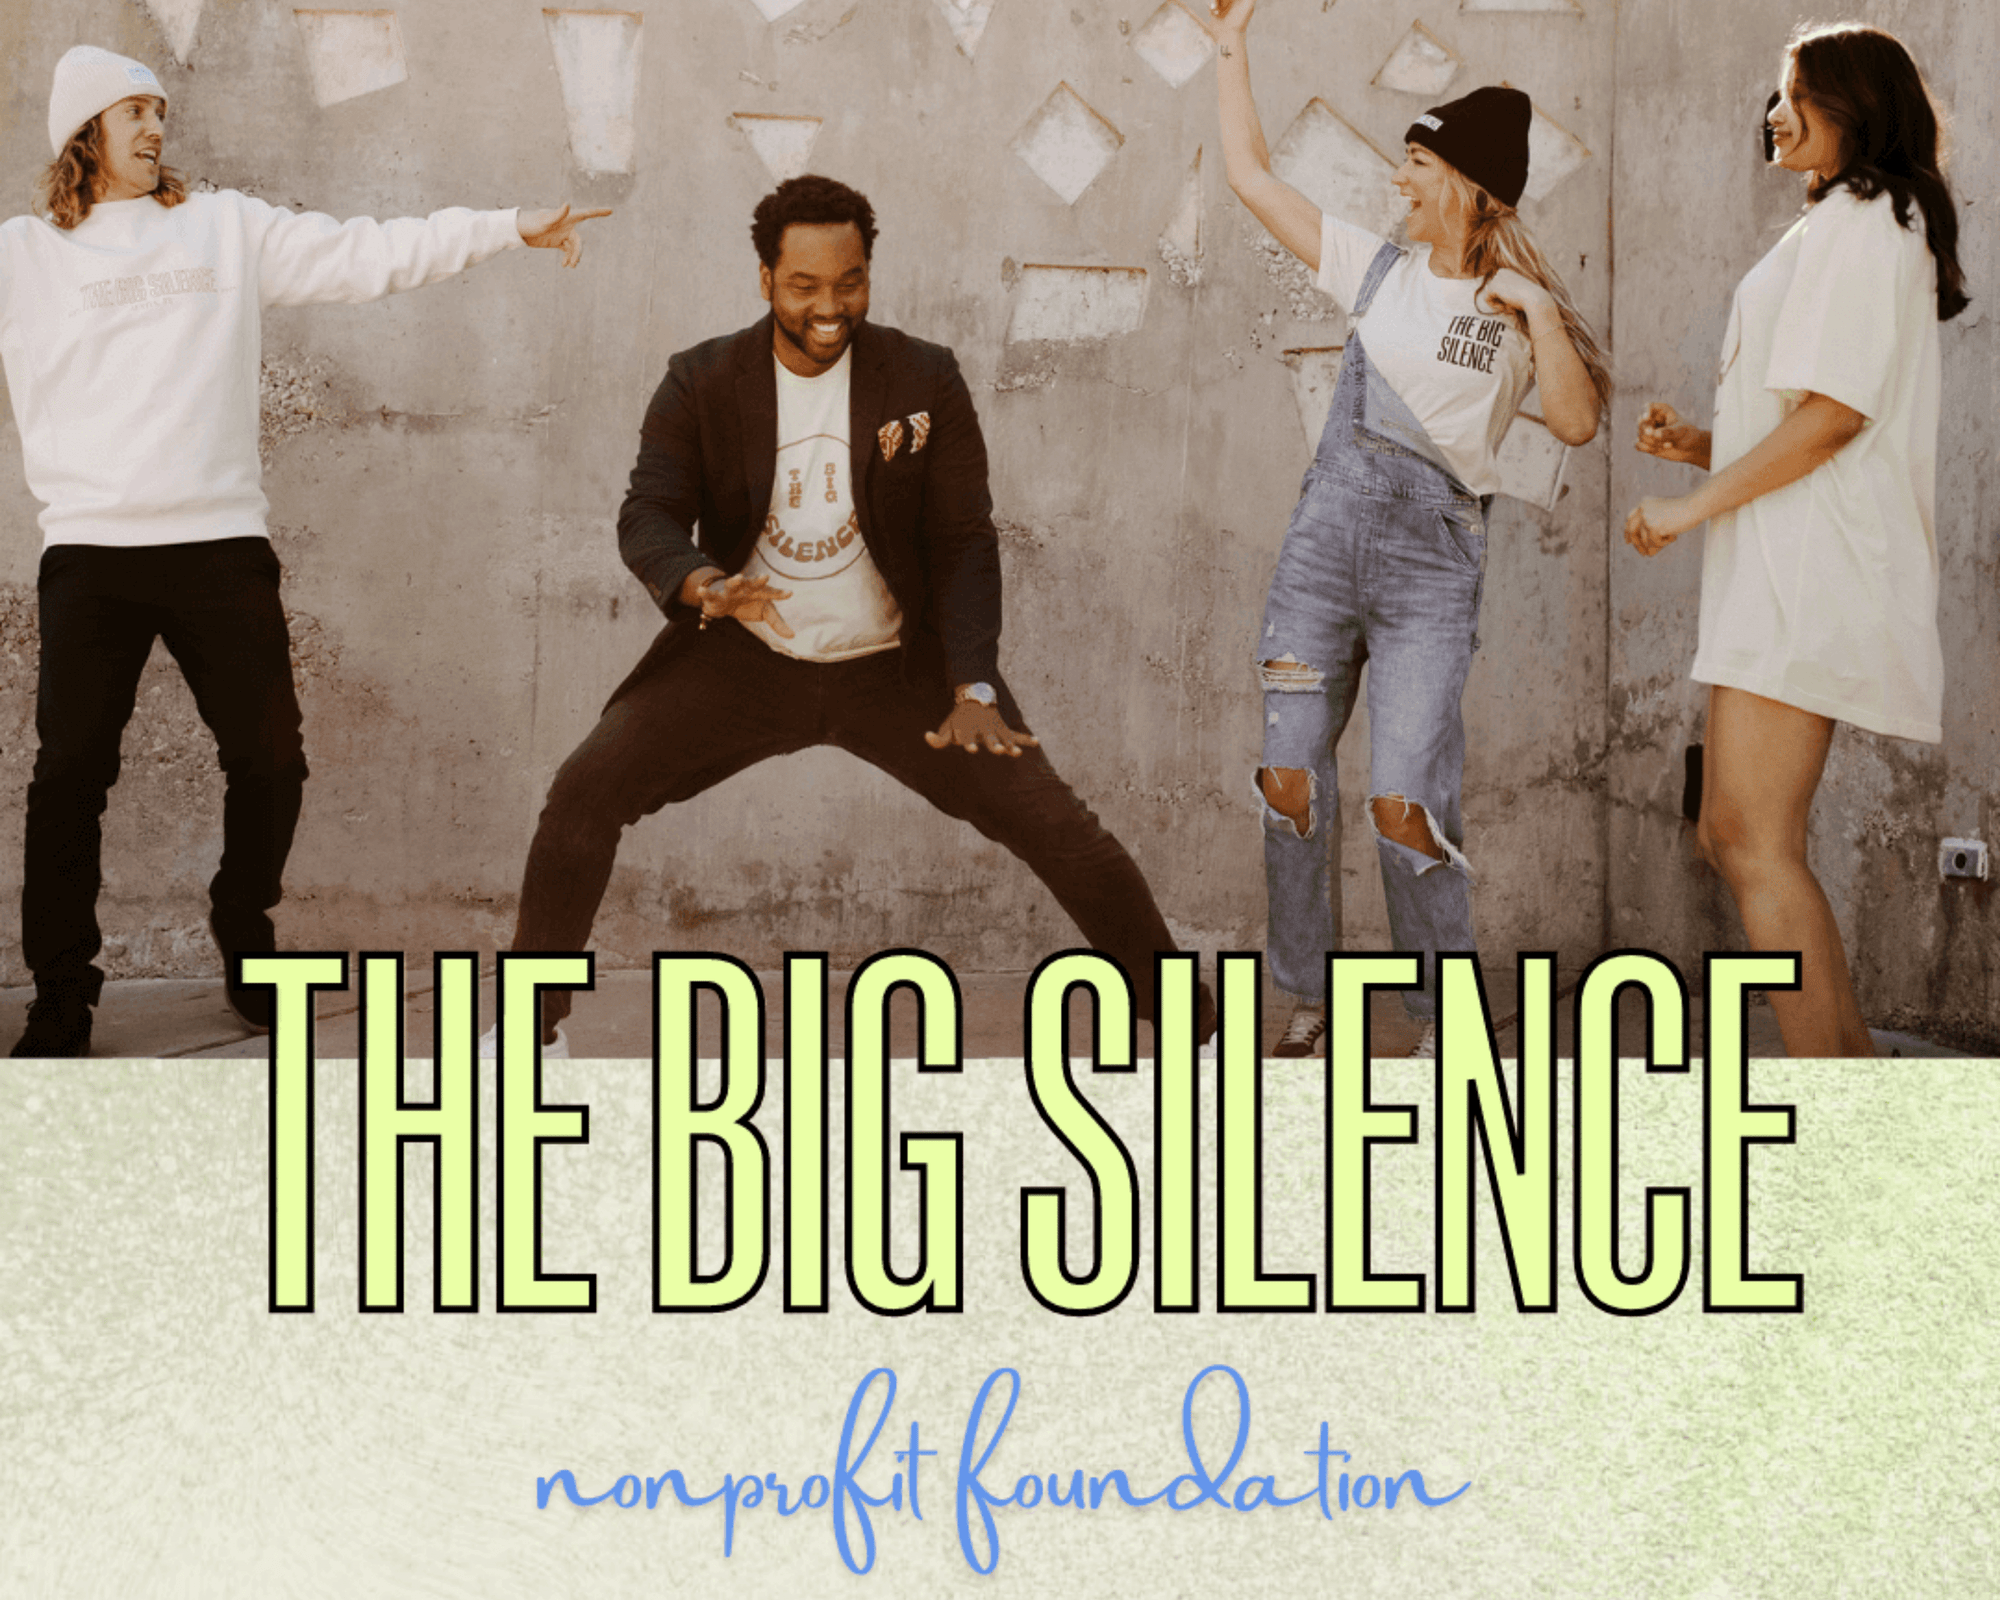 Make a donation to the big silence